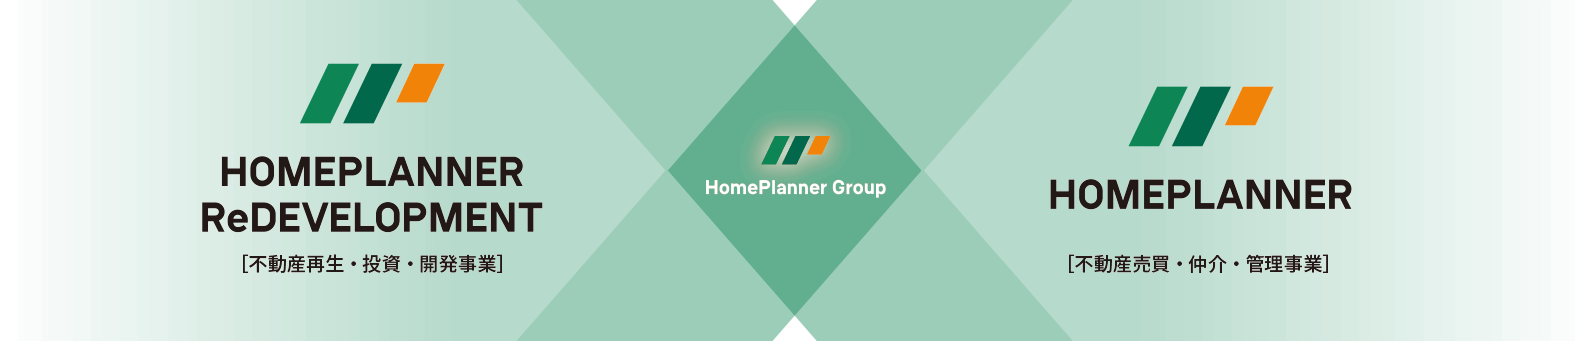 HOME PLANNER Group